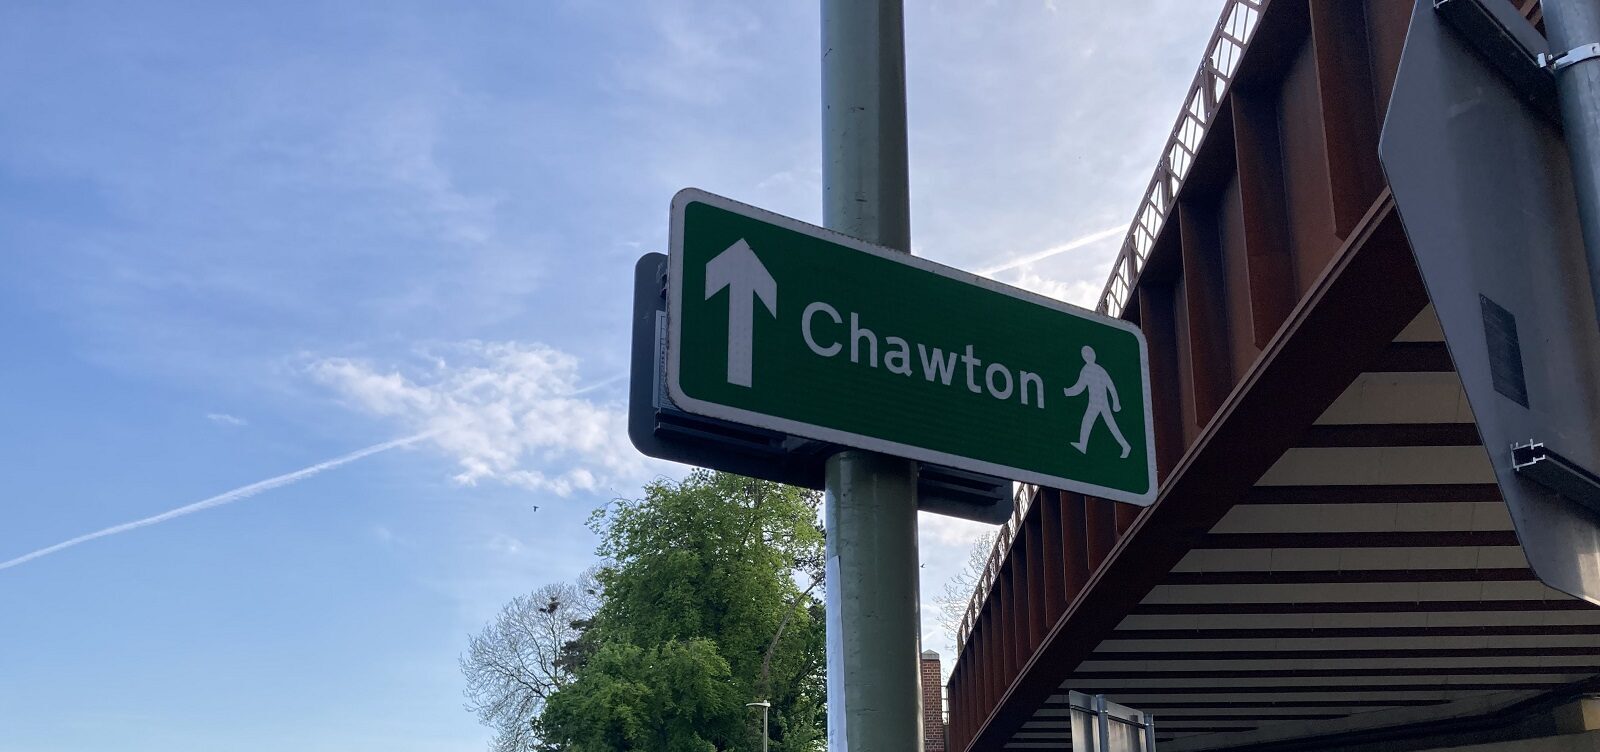 Green street sign pointing the way to walk to Chawton